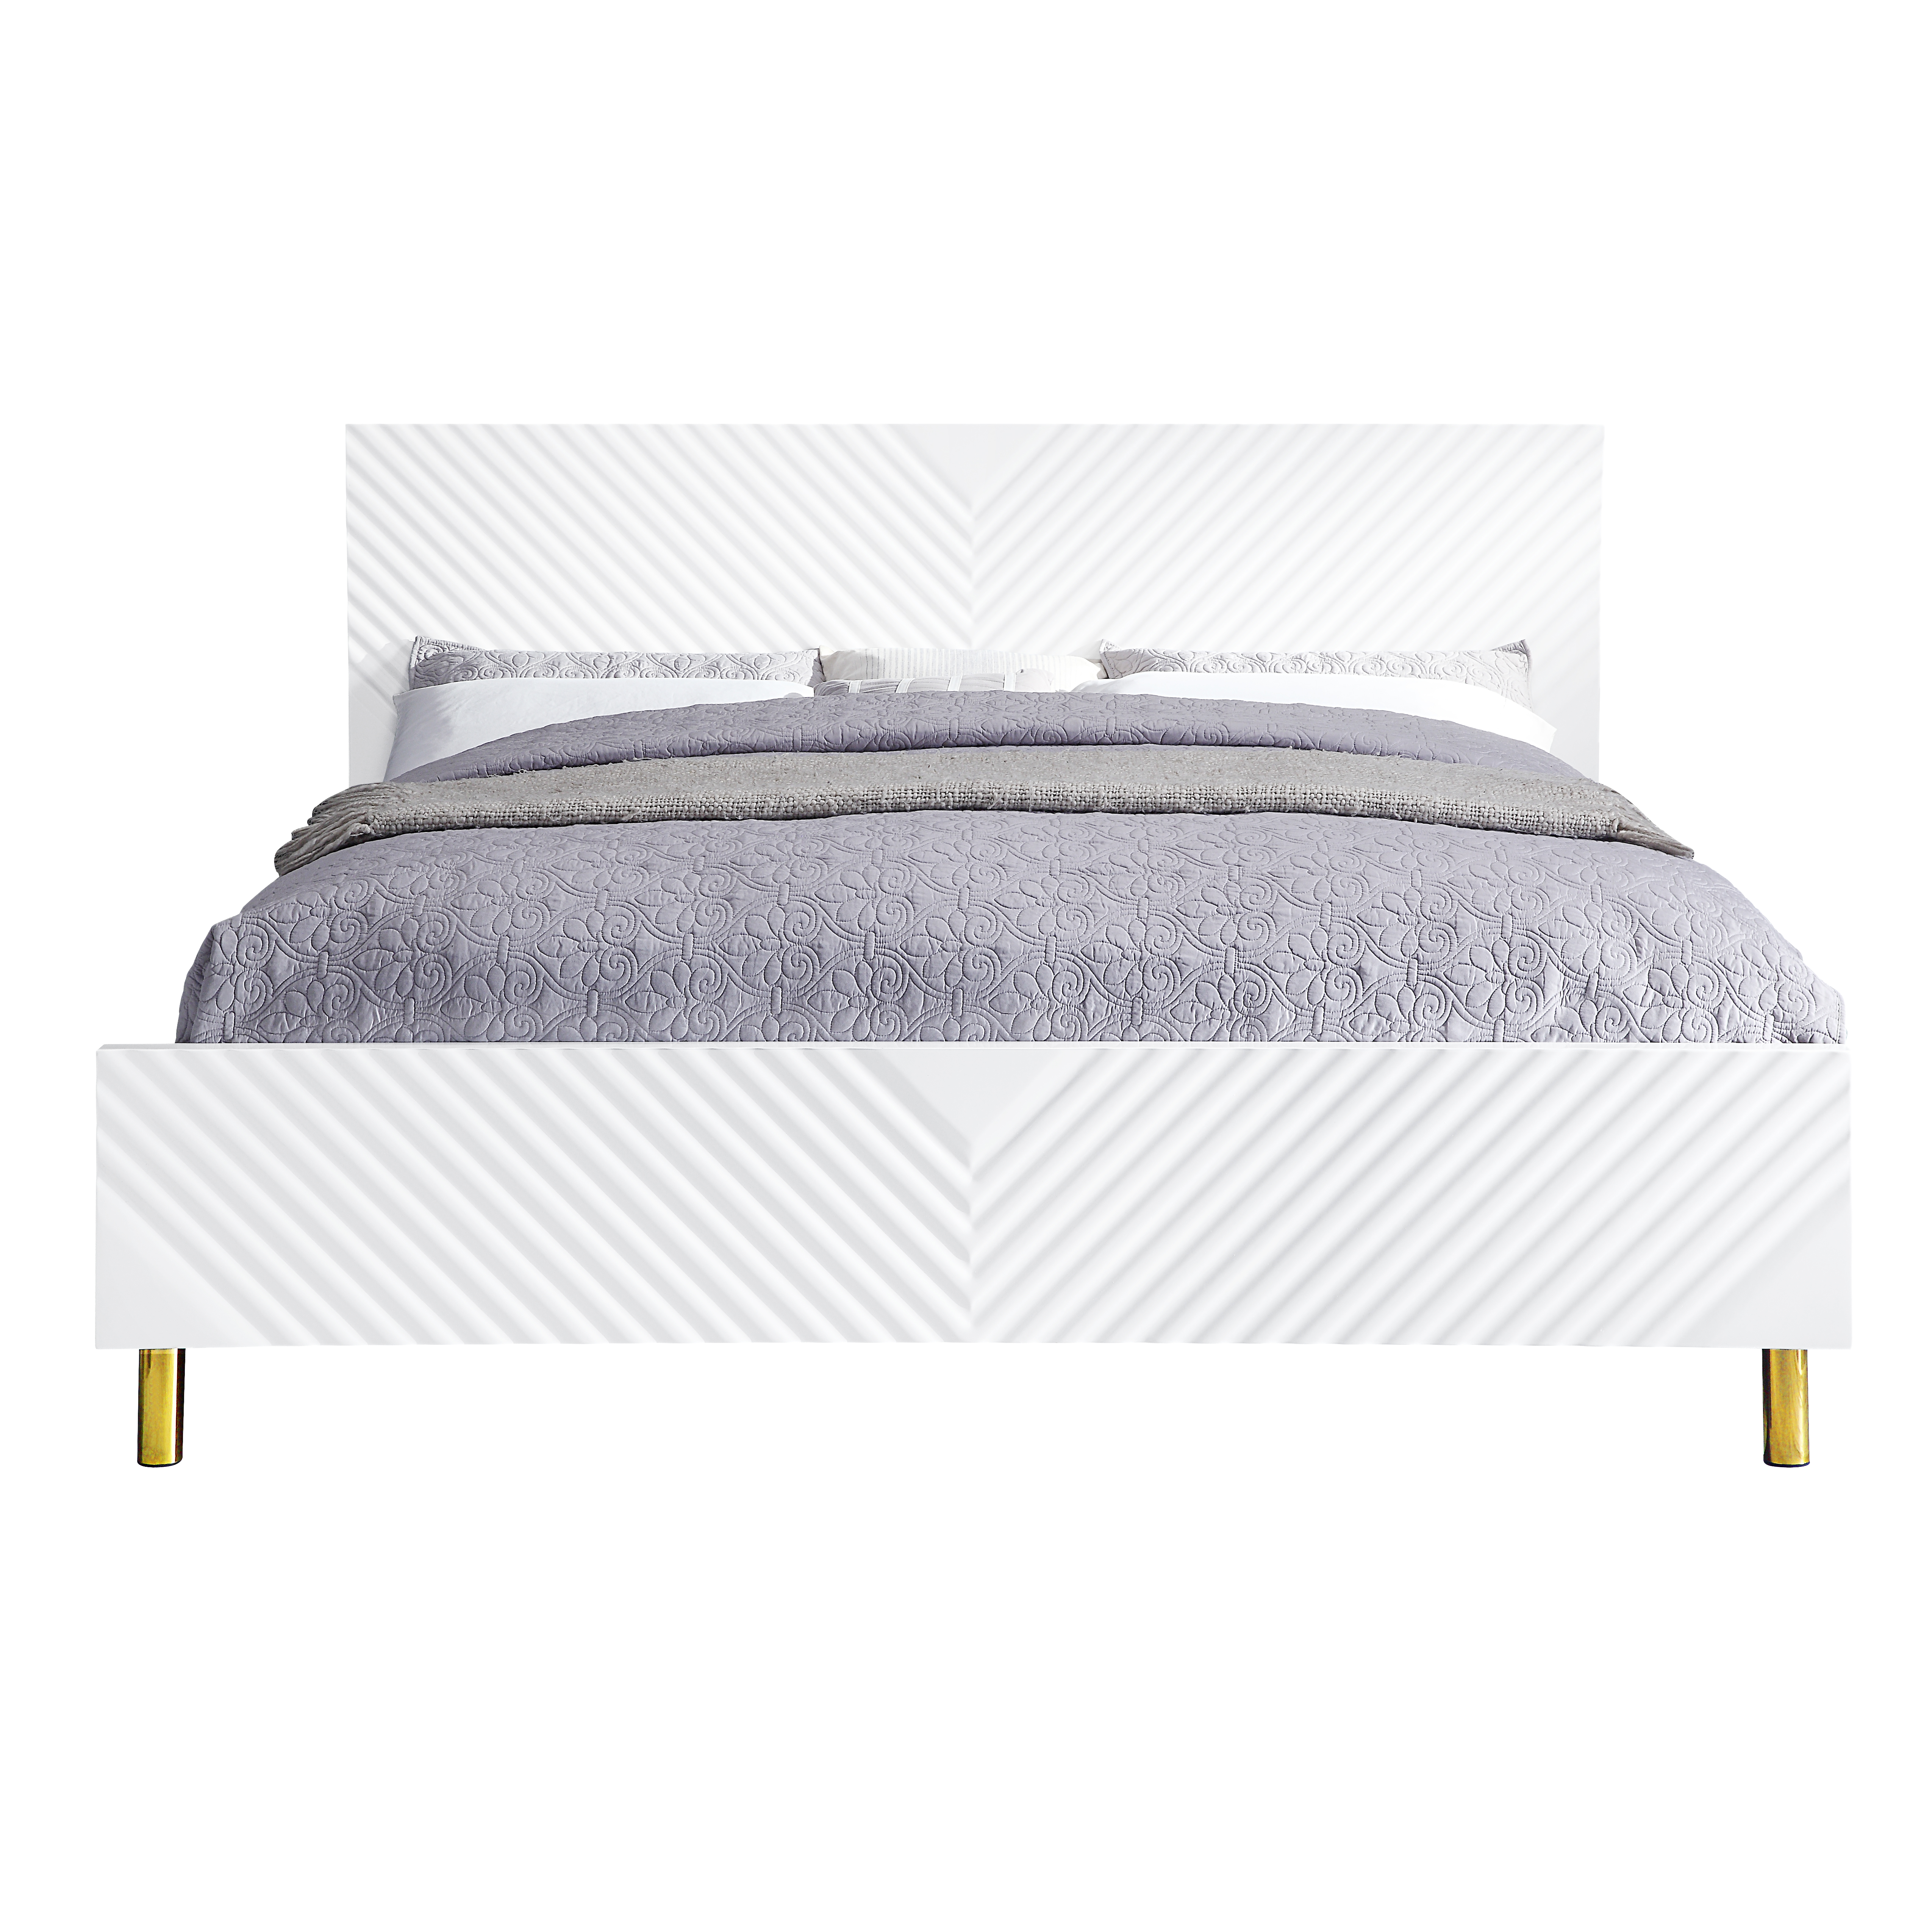 ACME Gaines Queen Bed, White High Gloss Finish